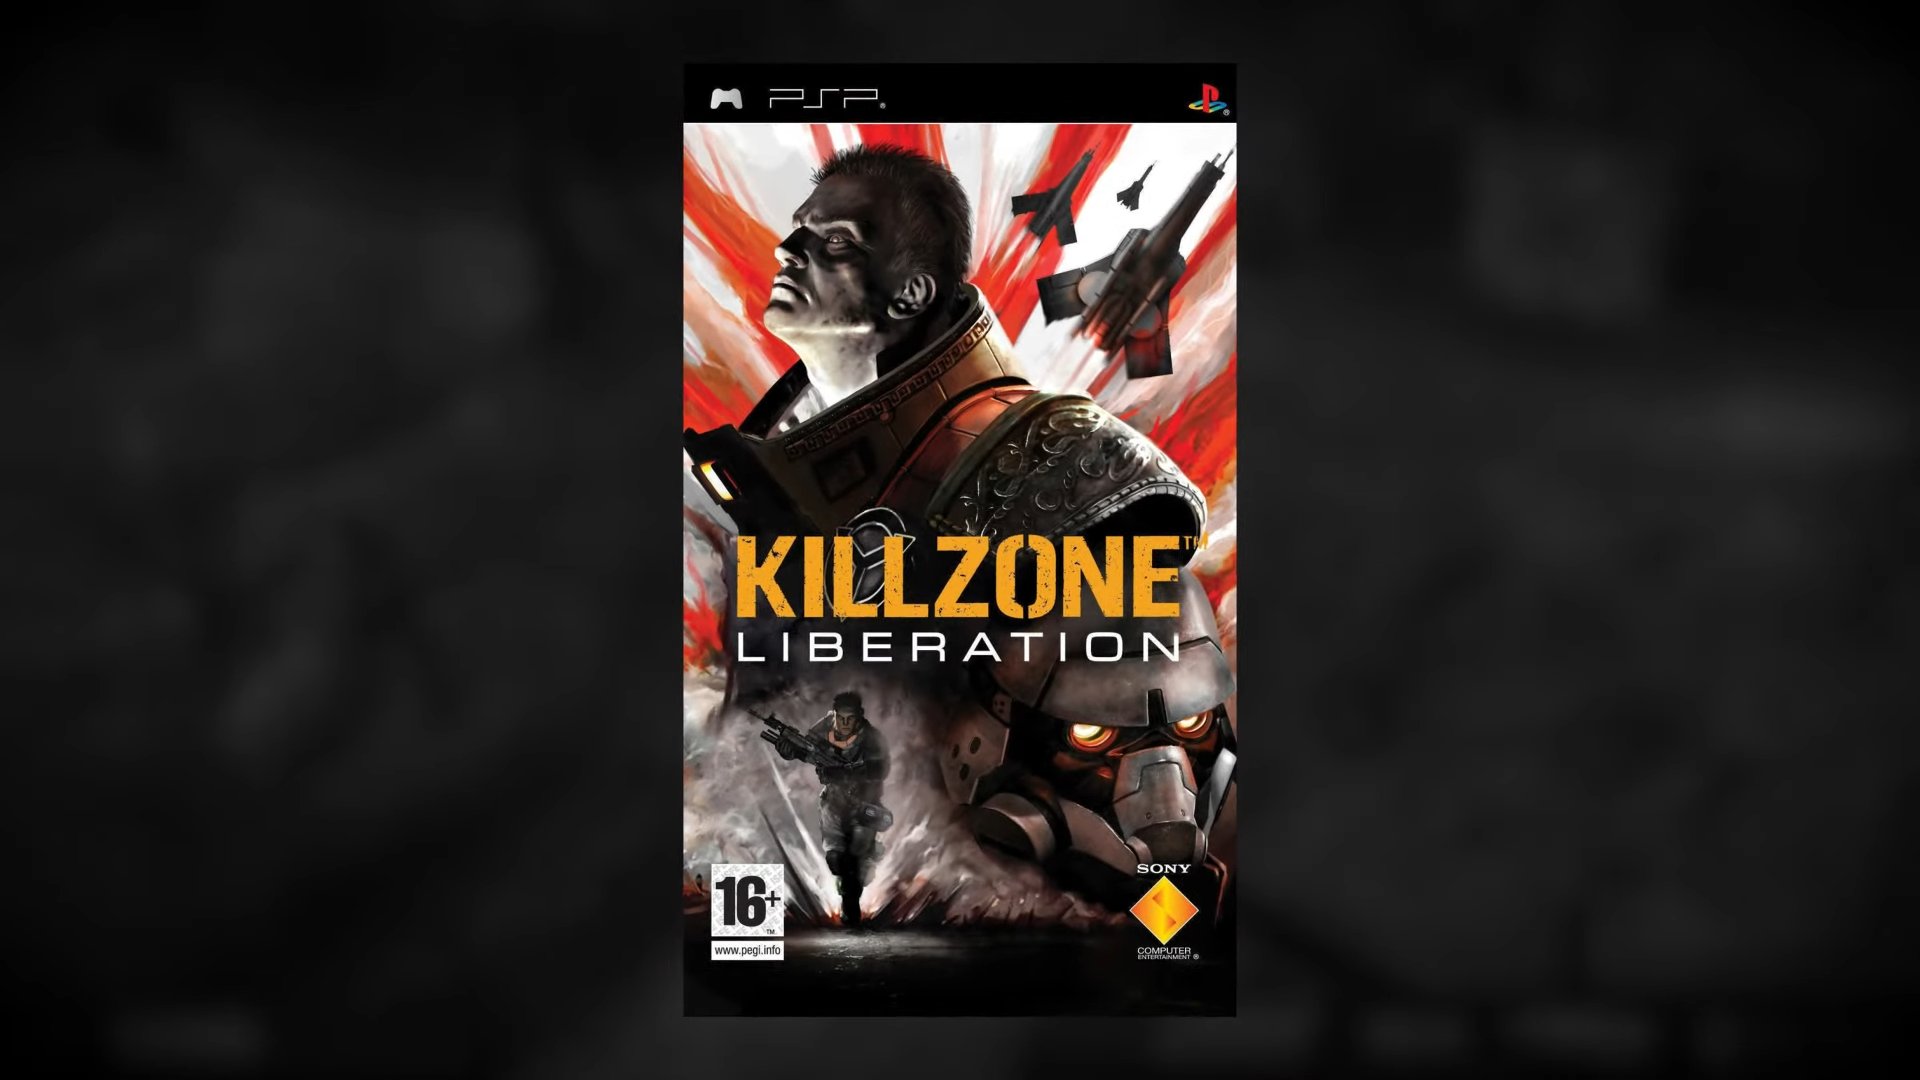 Killzone Liberation trophies revealed as PSP classic comes to PS Plus